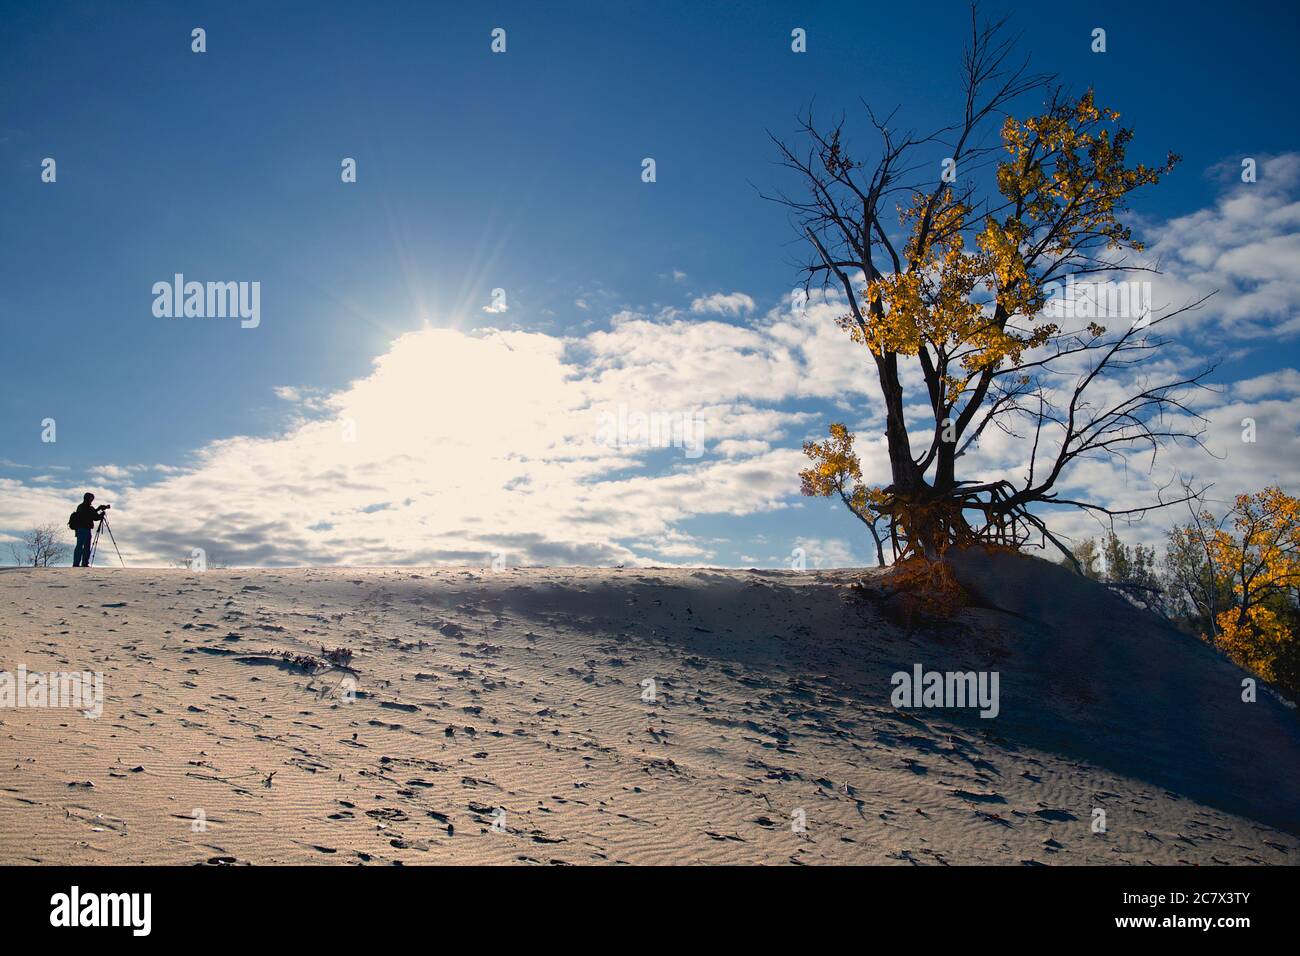 Silhouette of the photographer in the sand dune with blue sky and autumn leaf color Stock Photo